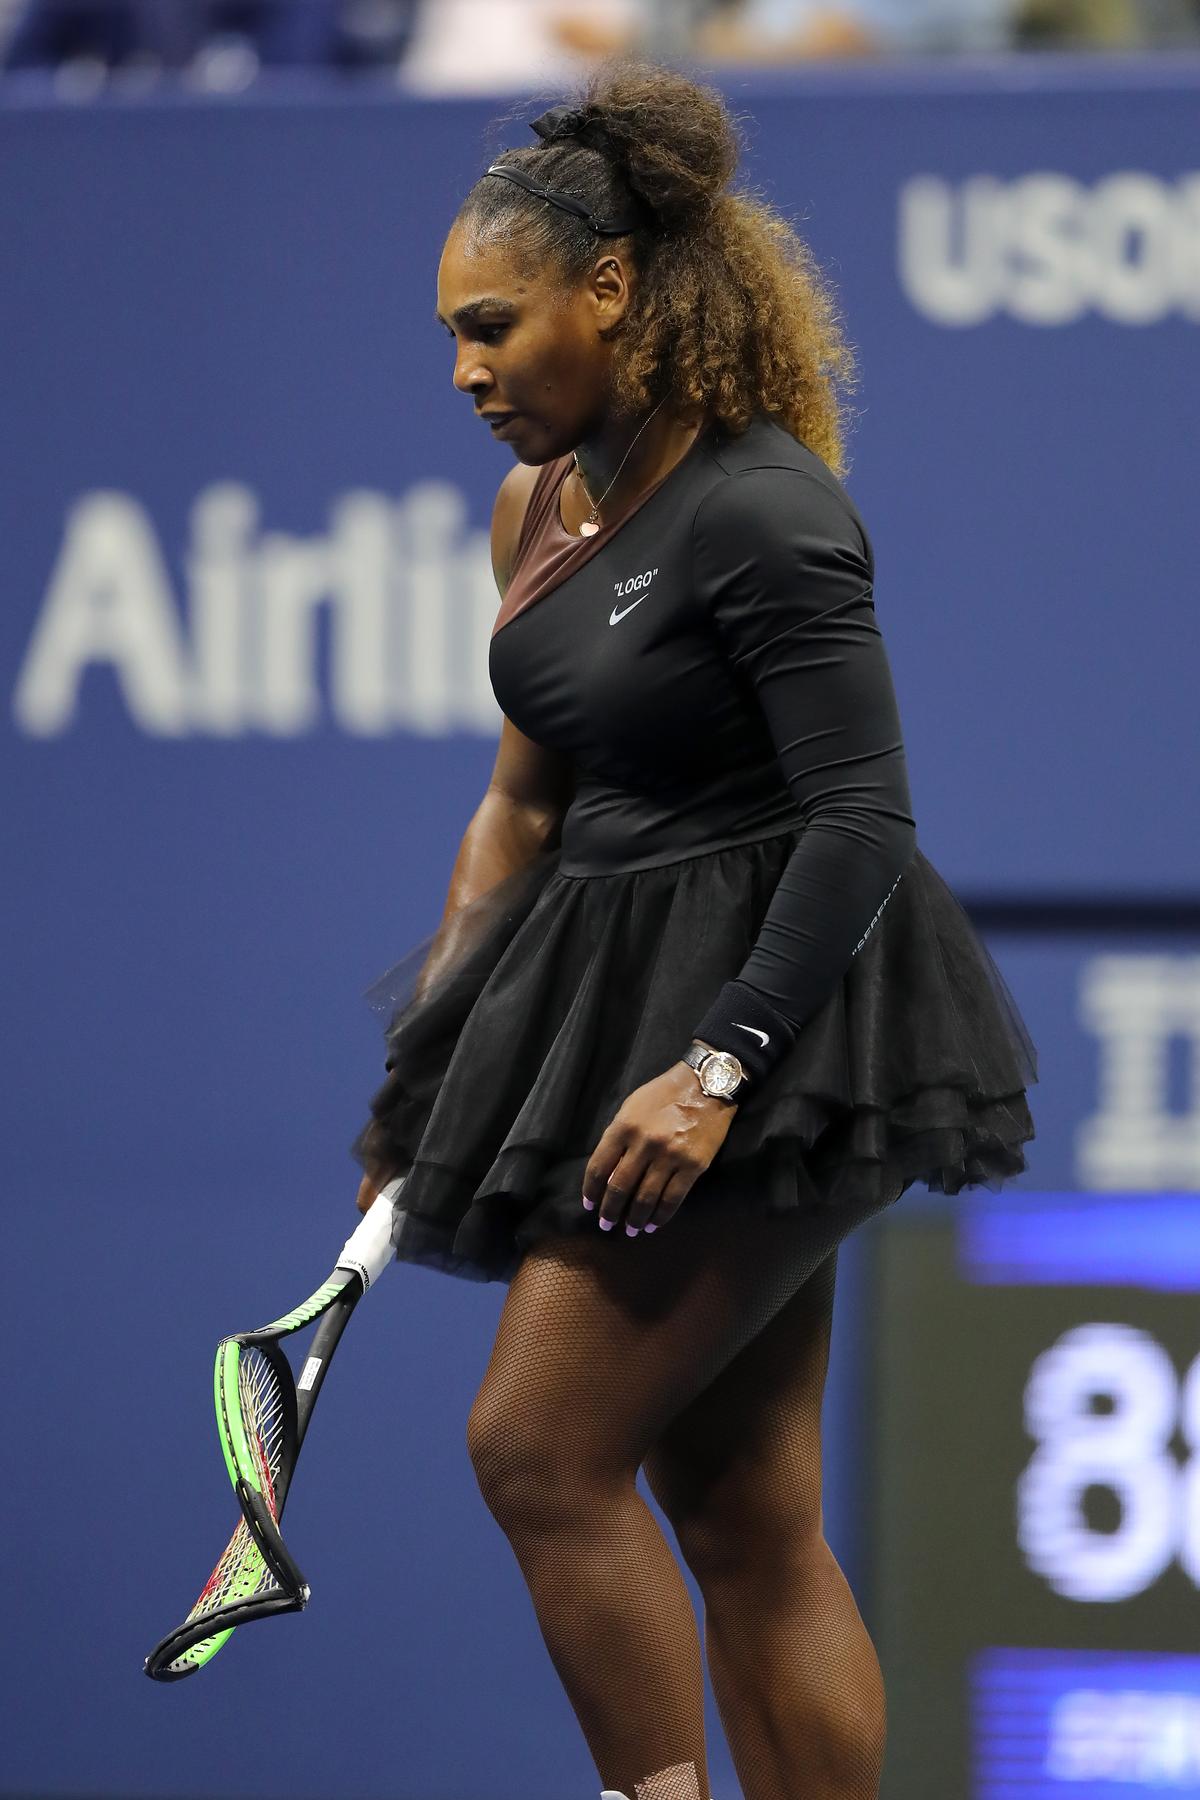 Serena Williams of the United States returns to her chair after smashing her racket during her Women's Singles finals match against Naomi Osaka of Japan on Day Thirteen of the 2018 US Open at the USTA Billie Jean King National Tennis Center in the Flushing neighborhood of the Queens borough of New York City on Sept. 8, 2018. (Elsa/Getty Images)